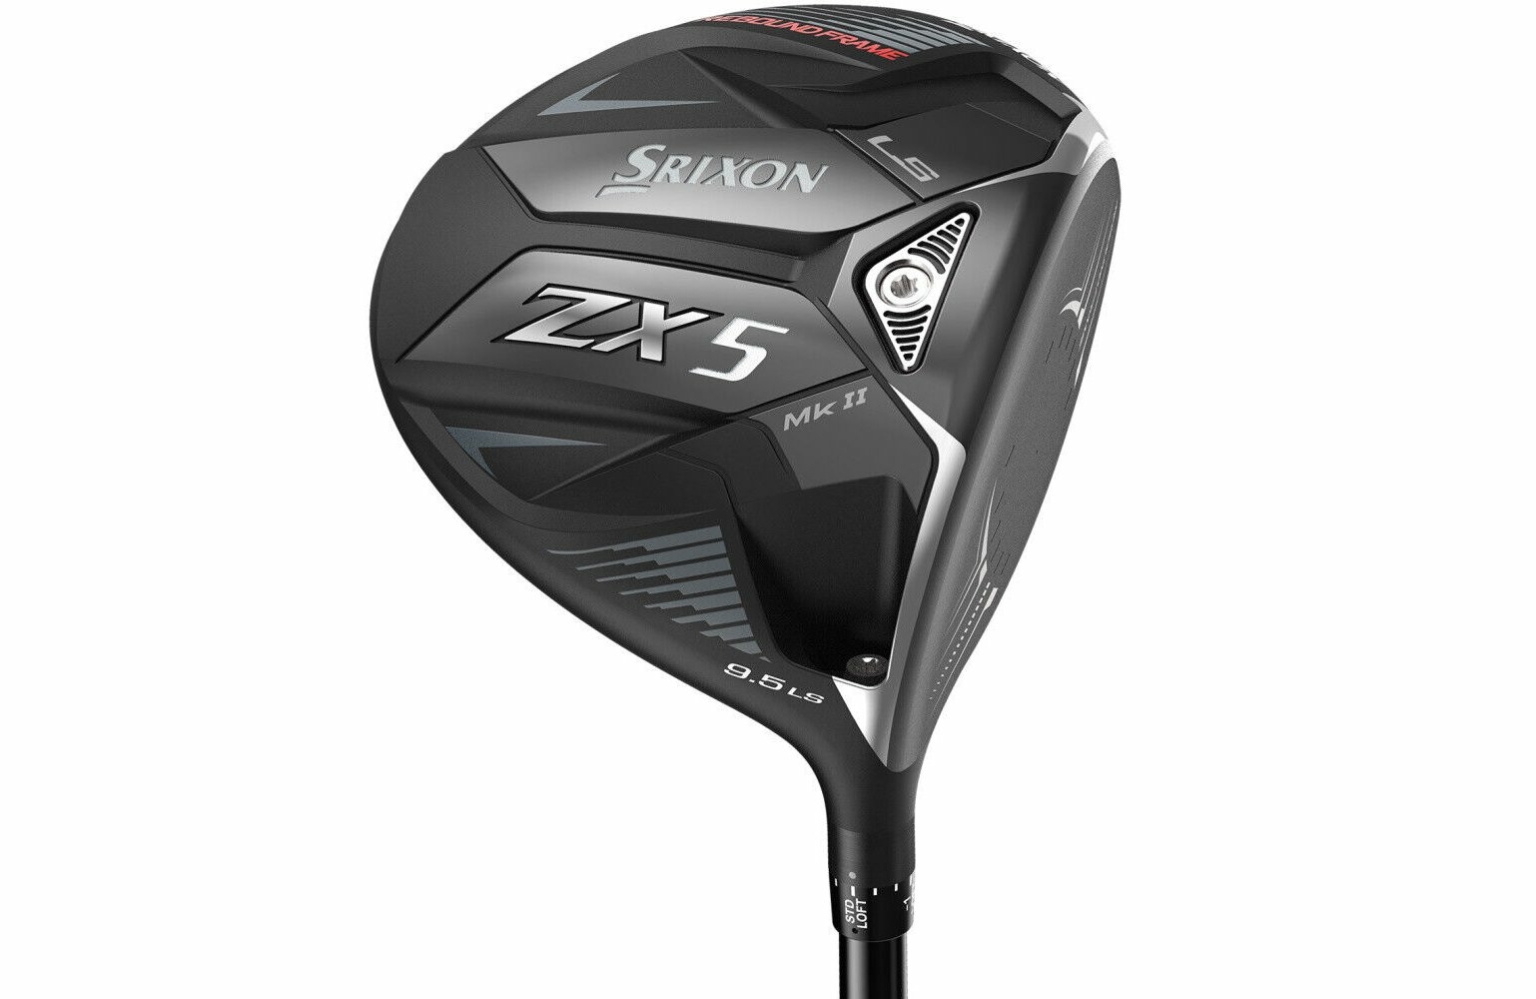 SRIXON ZX5 MK II DRIVER REVIEW IS IT WORTH IT? The Ultimate Golfing